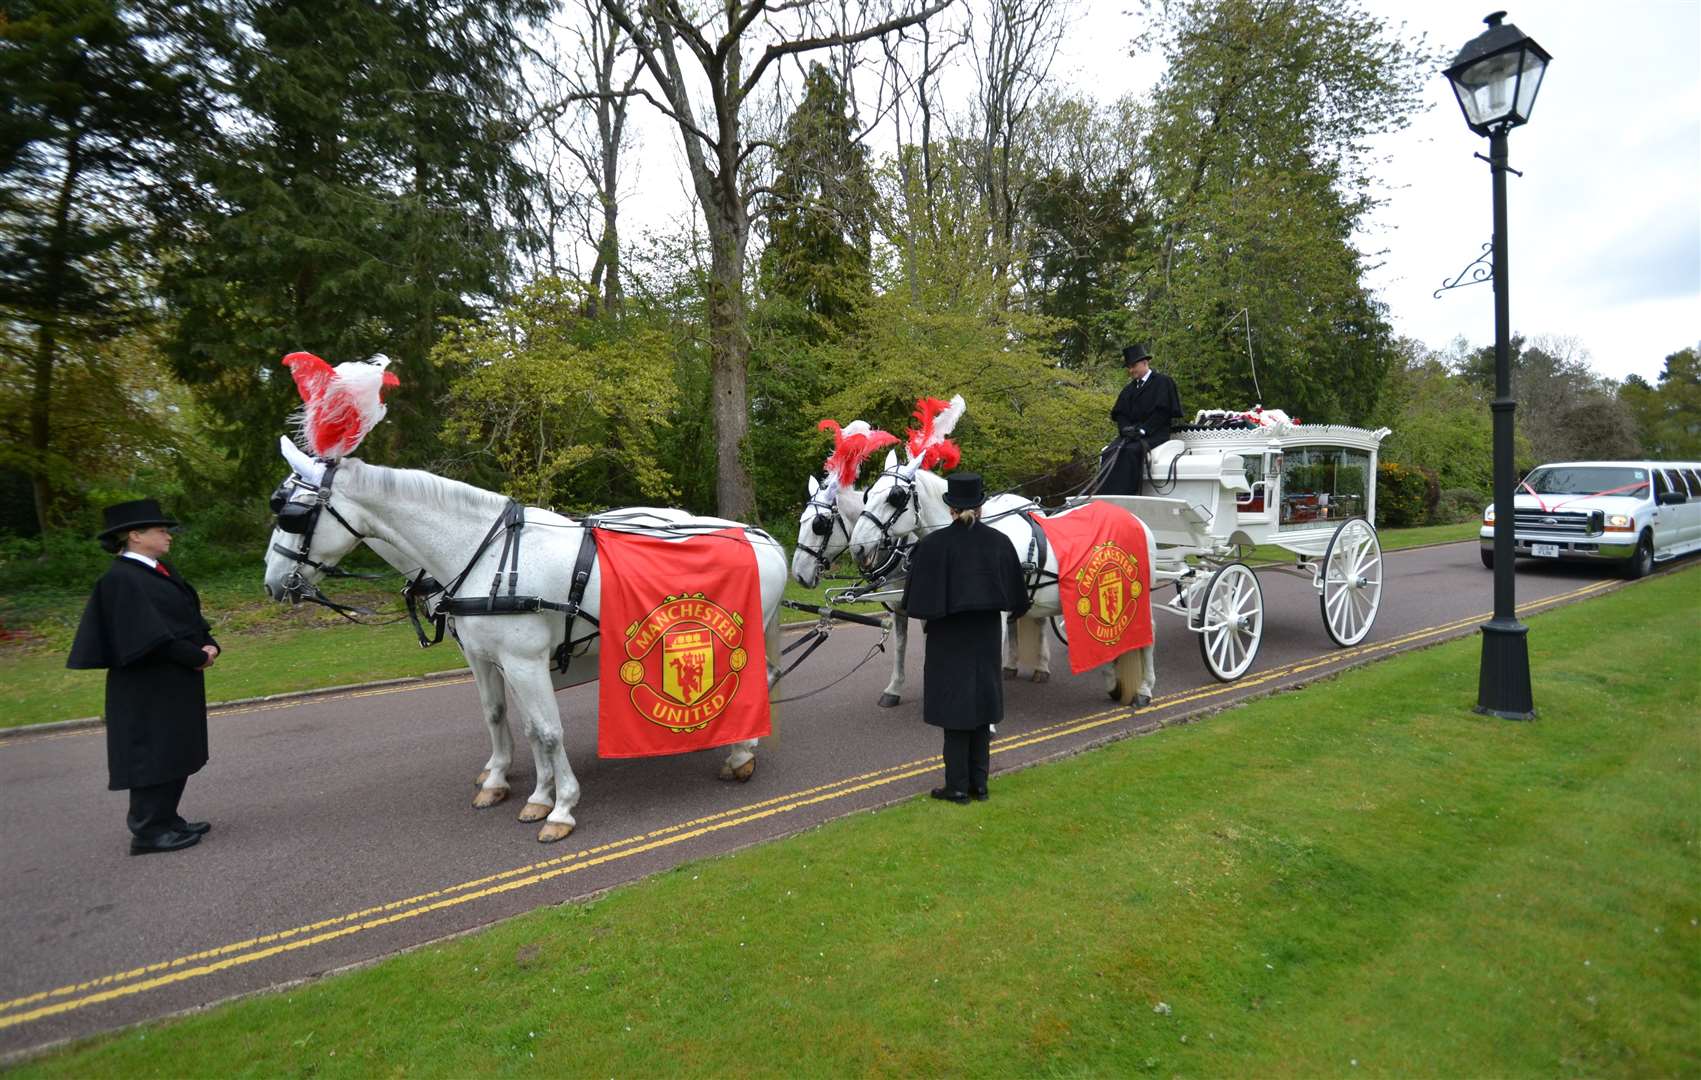 A horse-drawn carriage and Manchester United flags featured at the funeral. Picture: Steve Salter